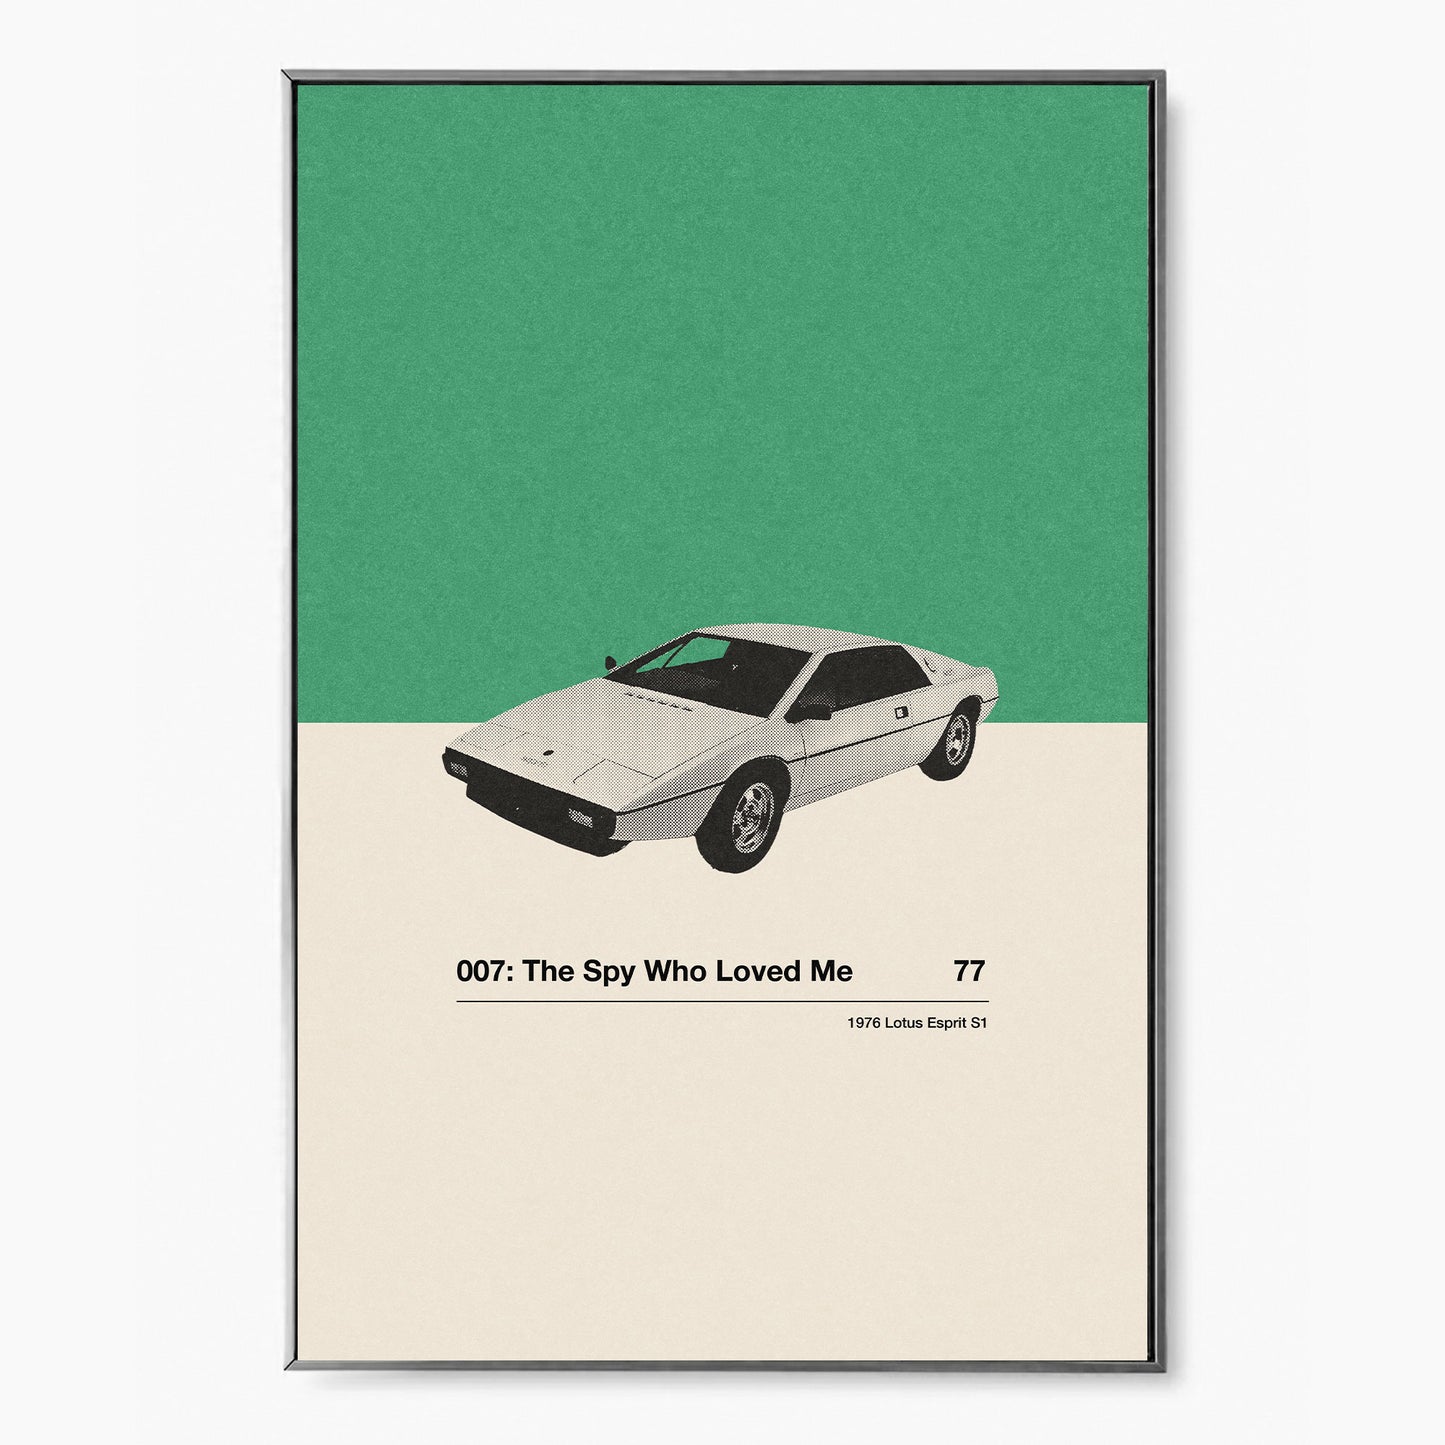 The Spy Who Loved Me Movie Car Poster